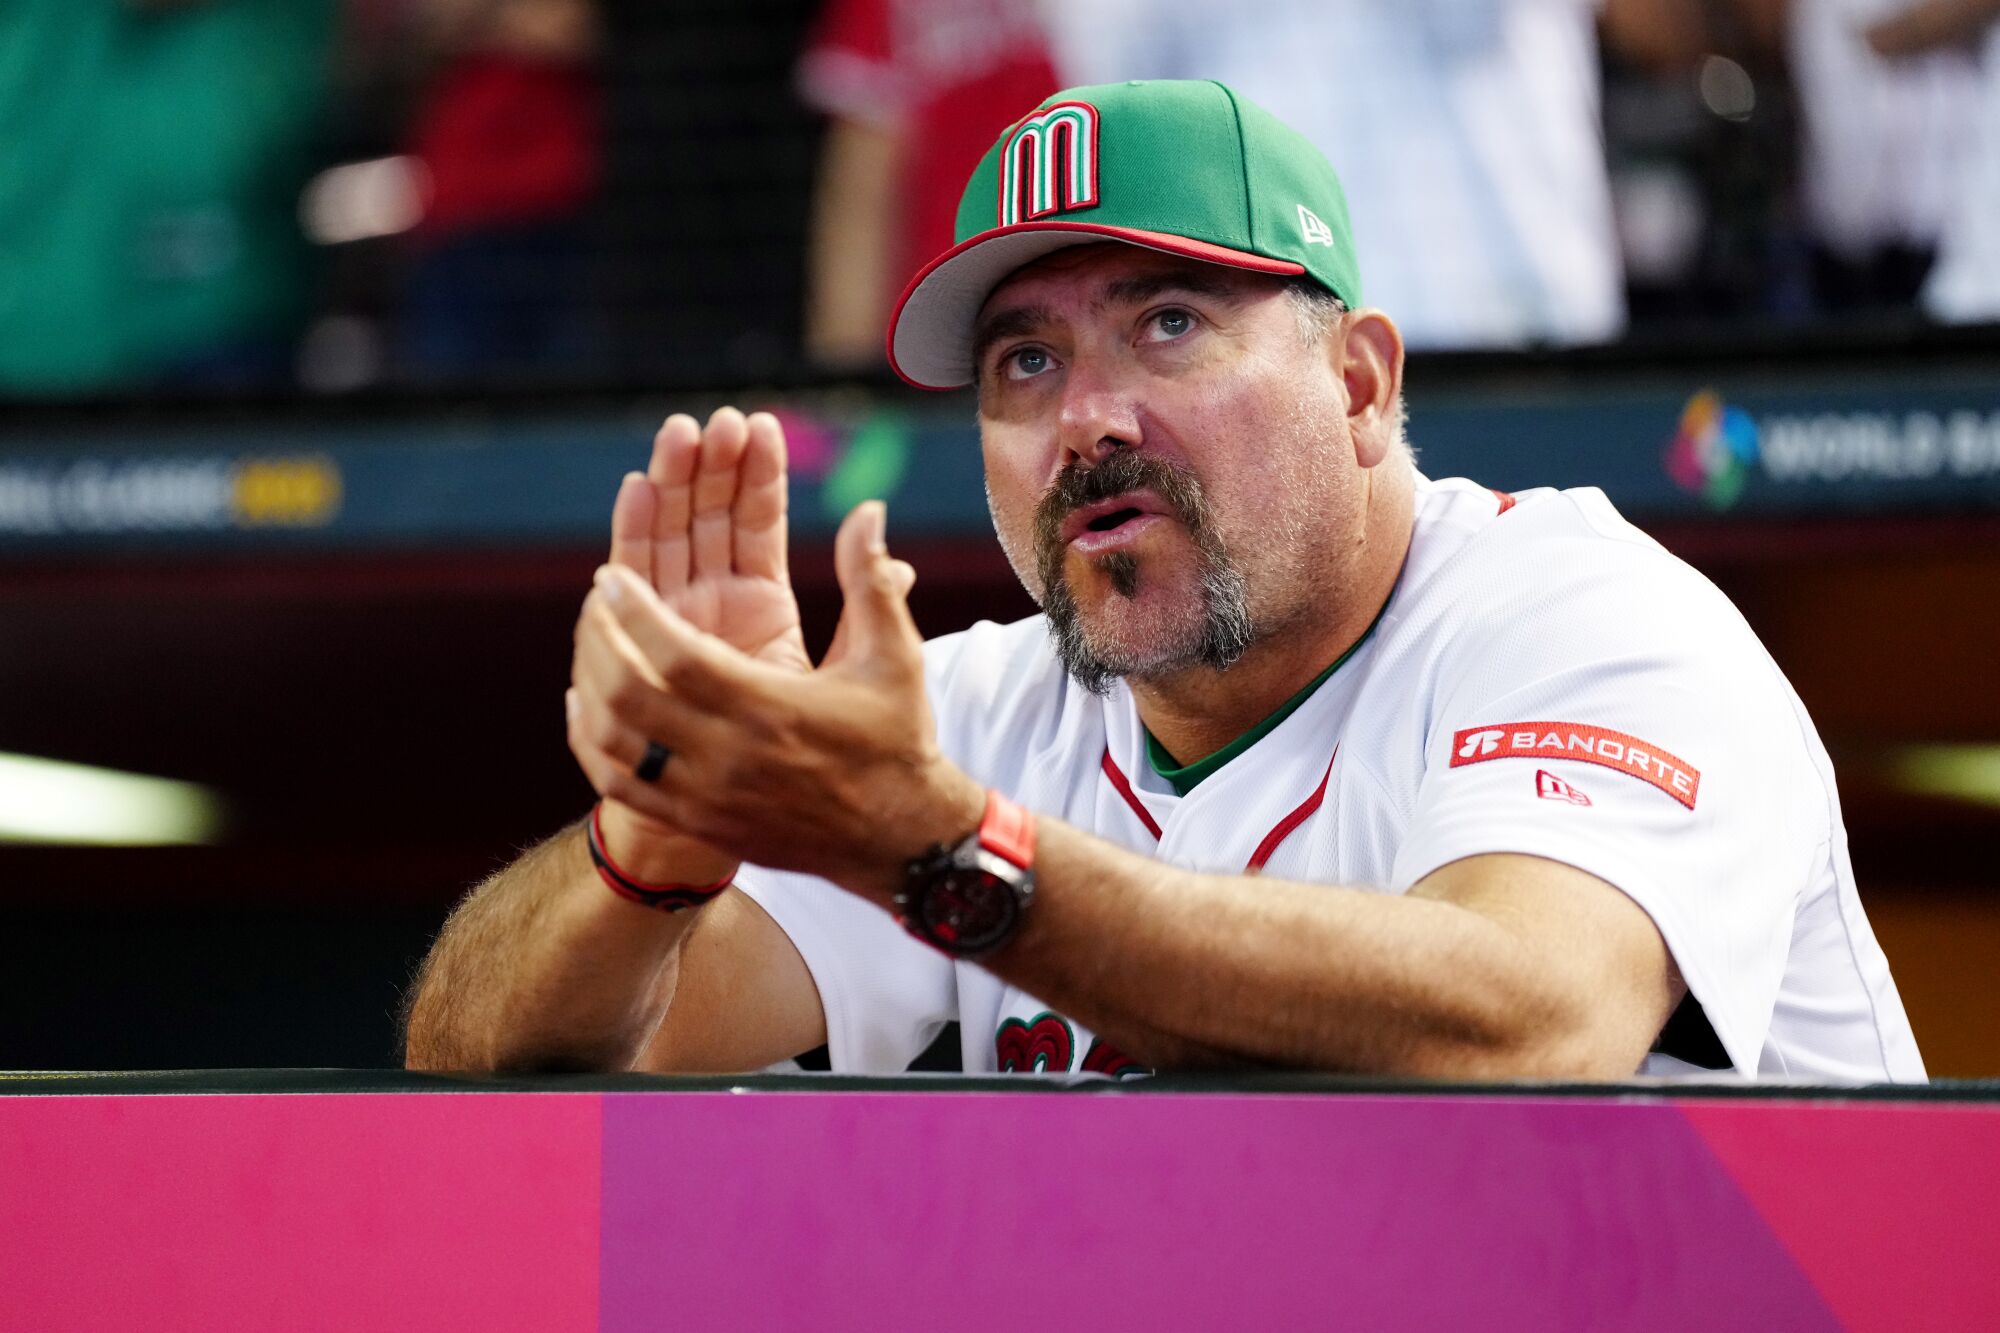 Mexico manager Benji Gil applauds during a World Baseball Classic match against Colombia on March 11.